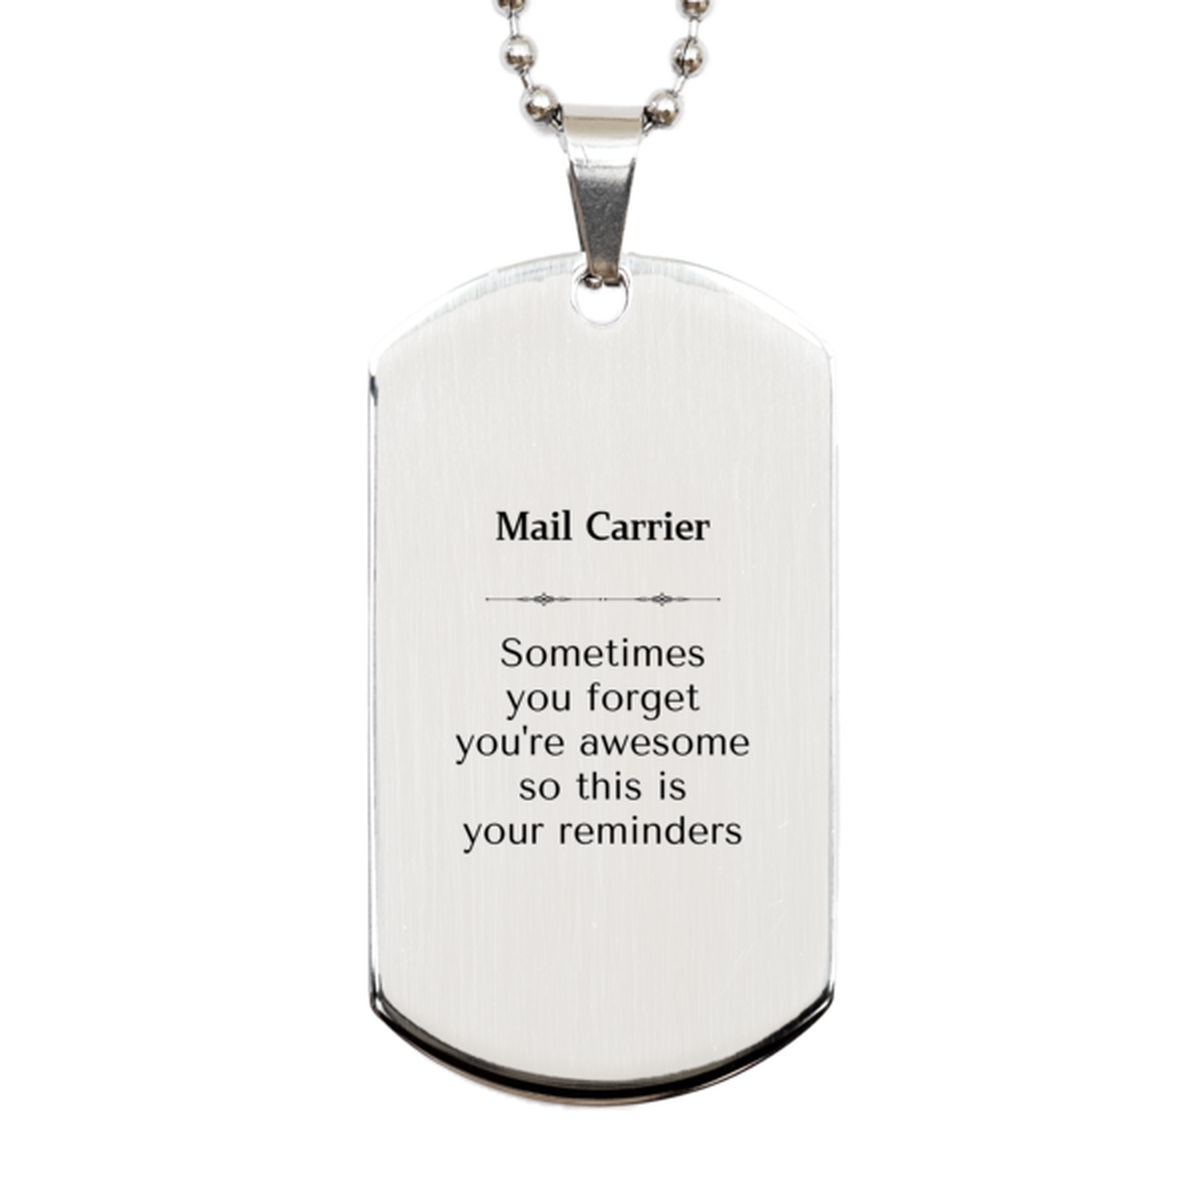 Sentimental Mail Carrier Silver Dog Tag, Mail Carrier Sometimes you forget you're awesome so this is your reminders, Graduation Christmas Birthday Gifts for Mail Carrier, Men, Women, Coworkers